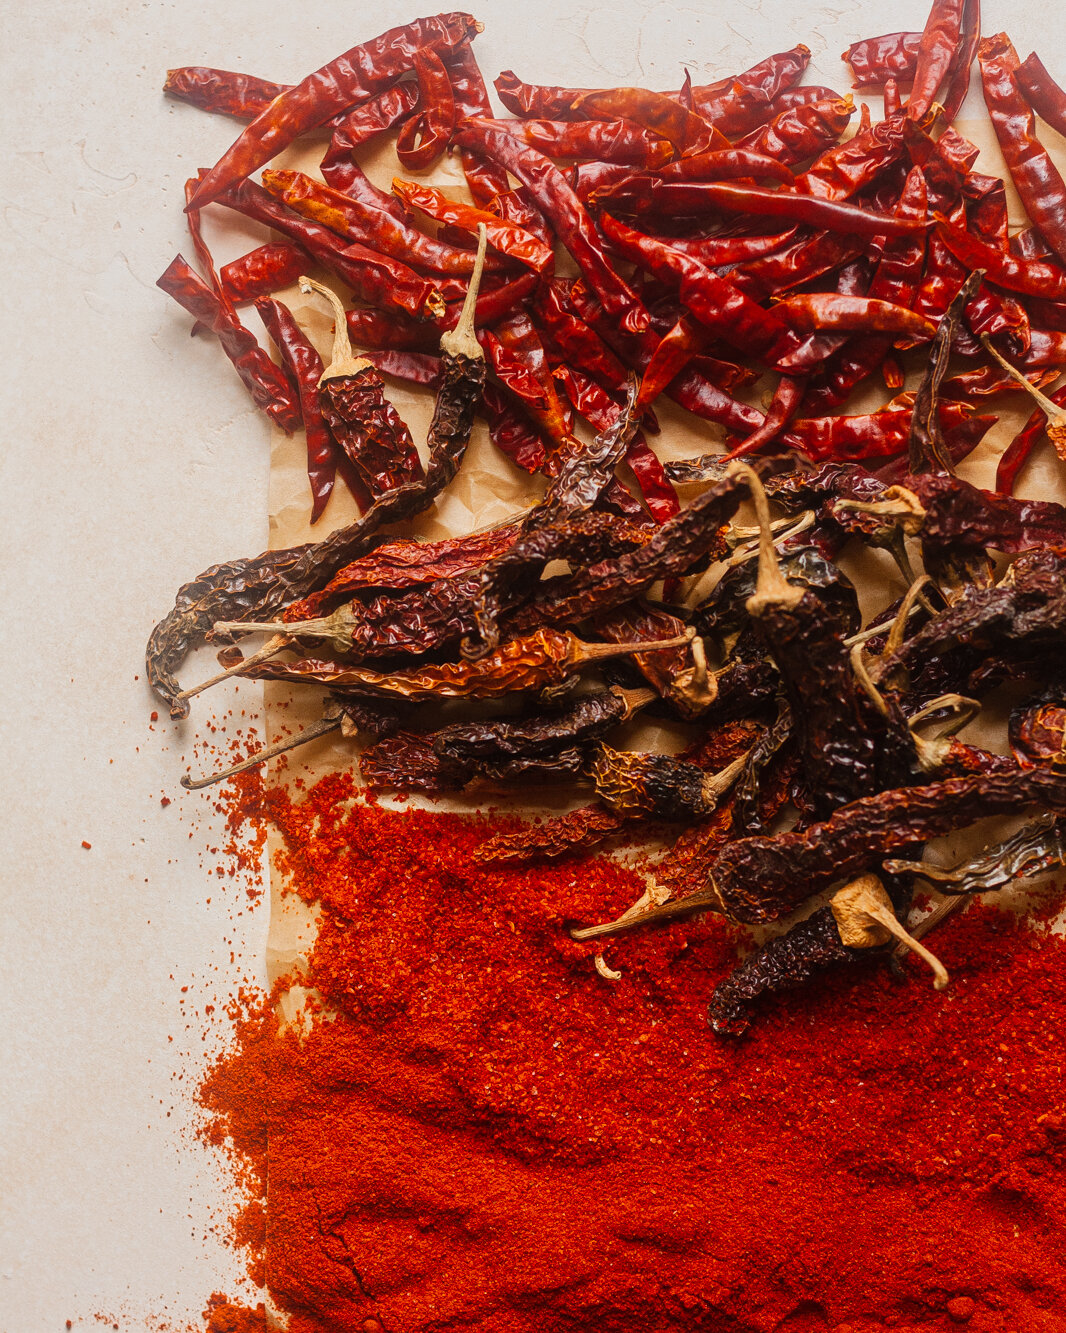 A Beginner’s Guide to Indian Cooking: All About Spices